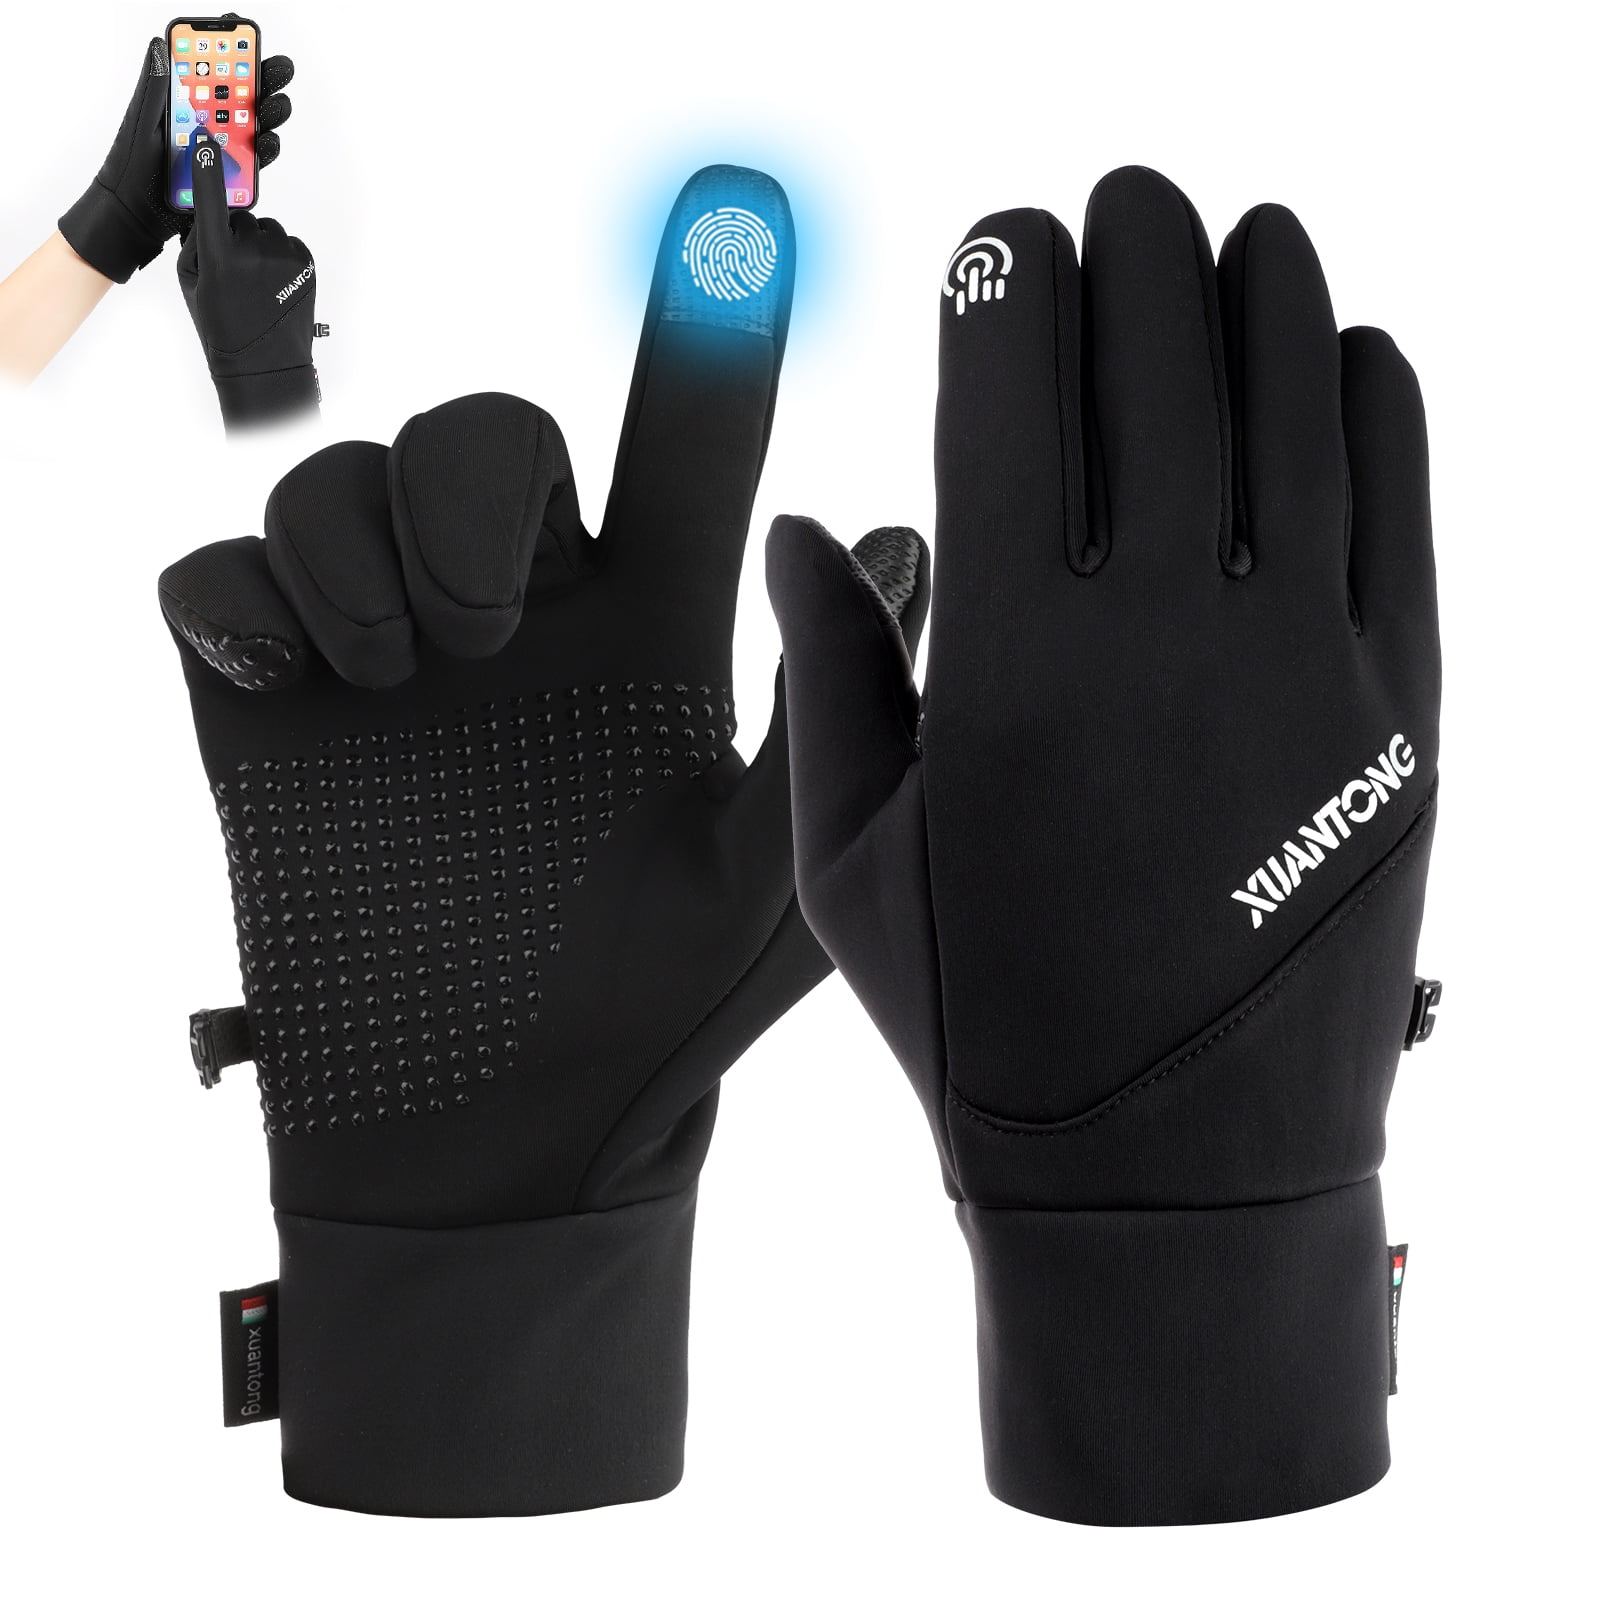 Kids Winter Running Thermal Gloves Touch Screen Non-slip Gloves Indoor Outdoor Warm for Boys & Girls Aged 4-10